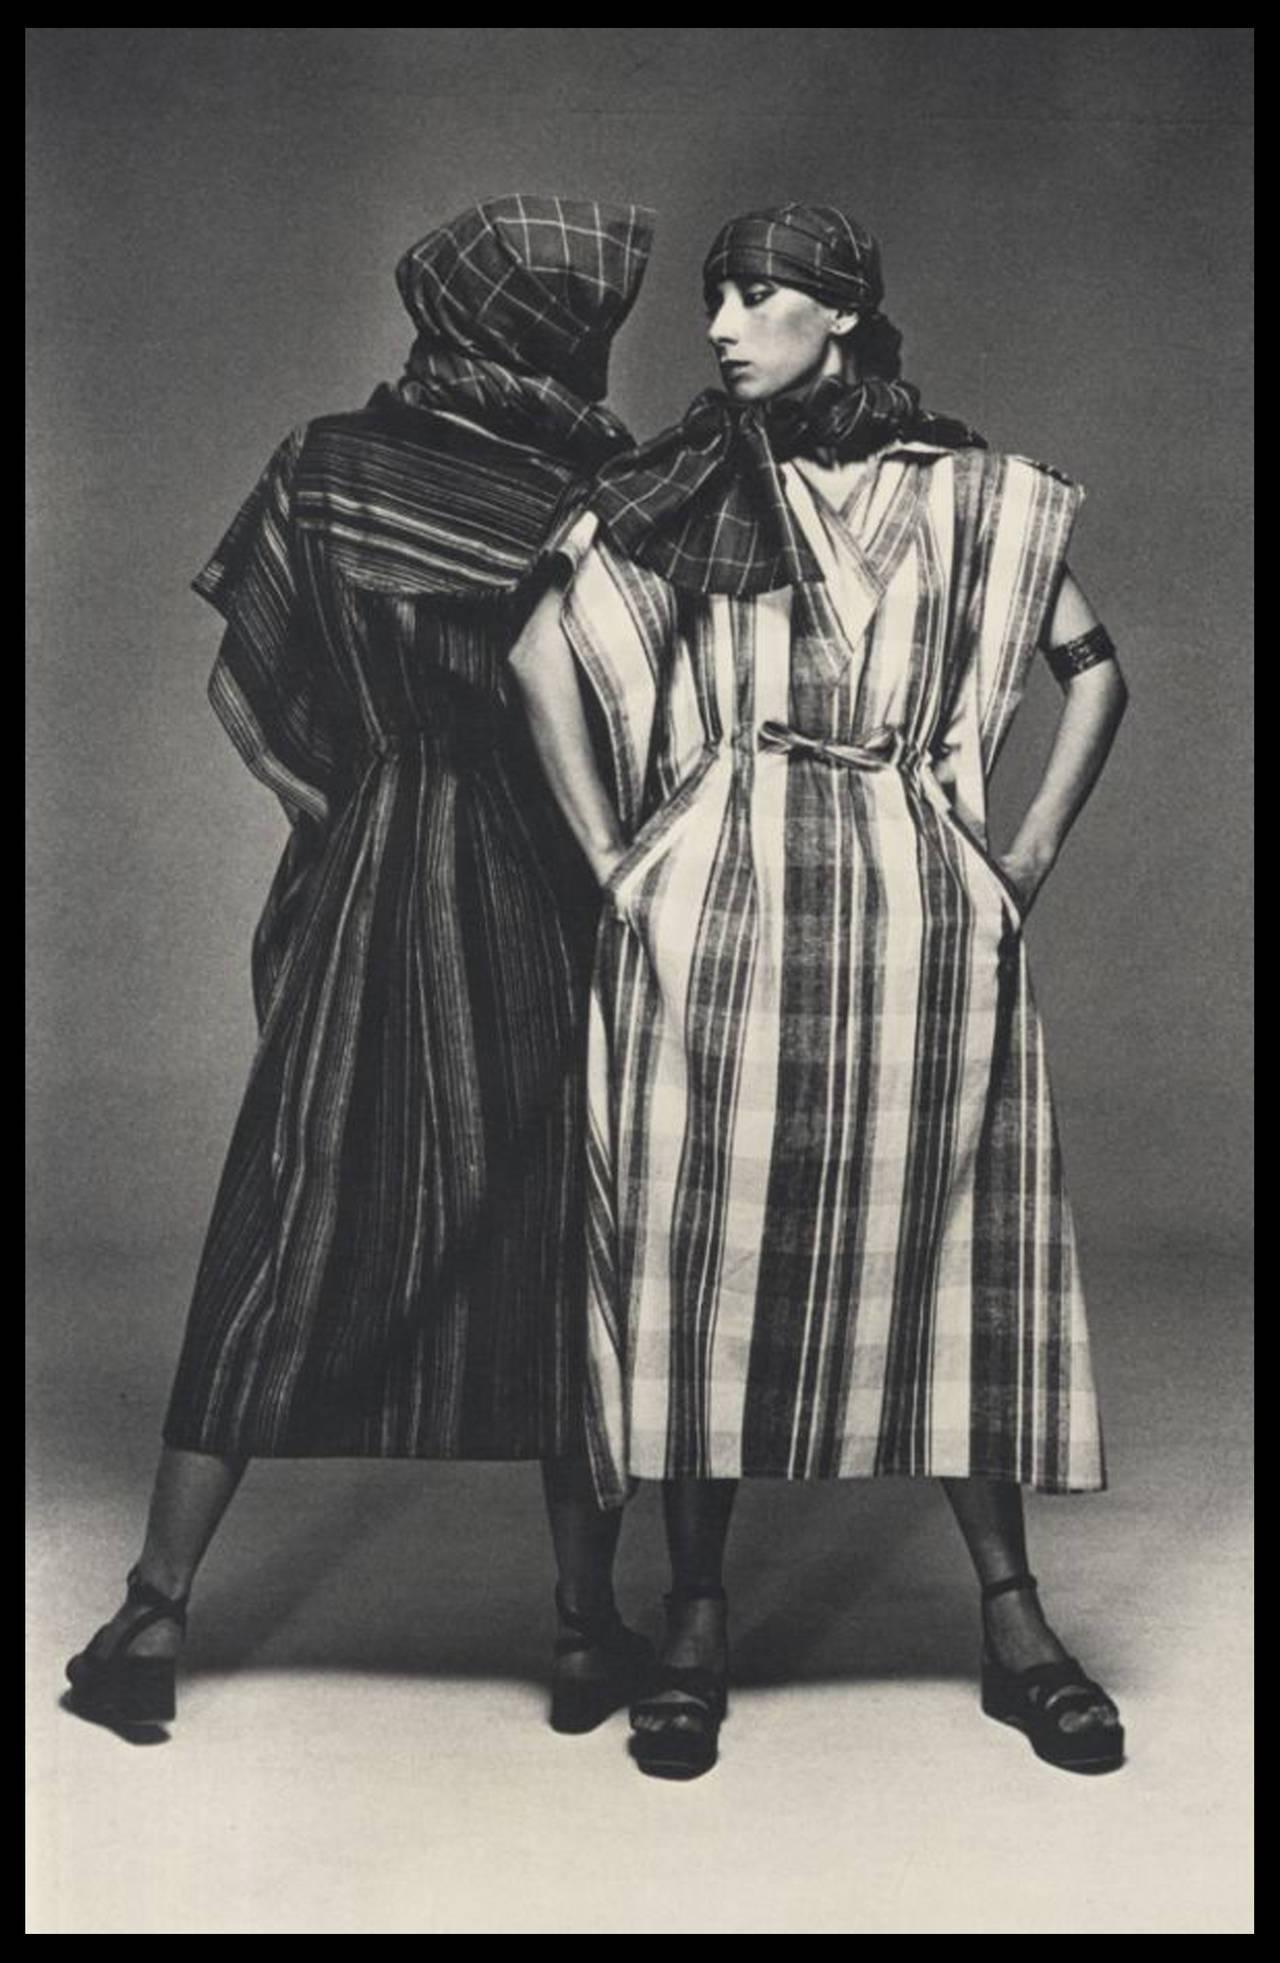 A knitted 2 ensemble by Issey Miyake from 1976. 

Ensemble includes the following:

1 striped knitted open caftan with extra long ribbed knit hooded scarf and 2 side open pockets

1 striped knitted long sleeve draped dress with 2 side open